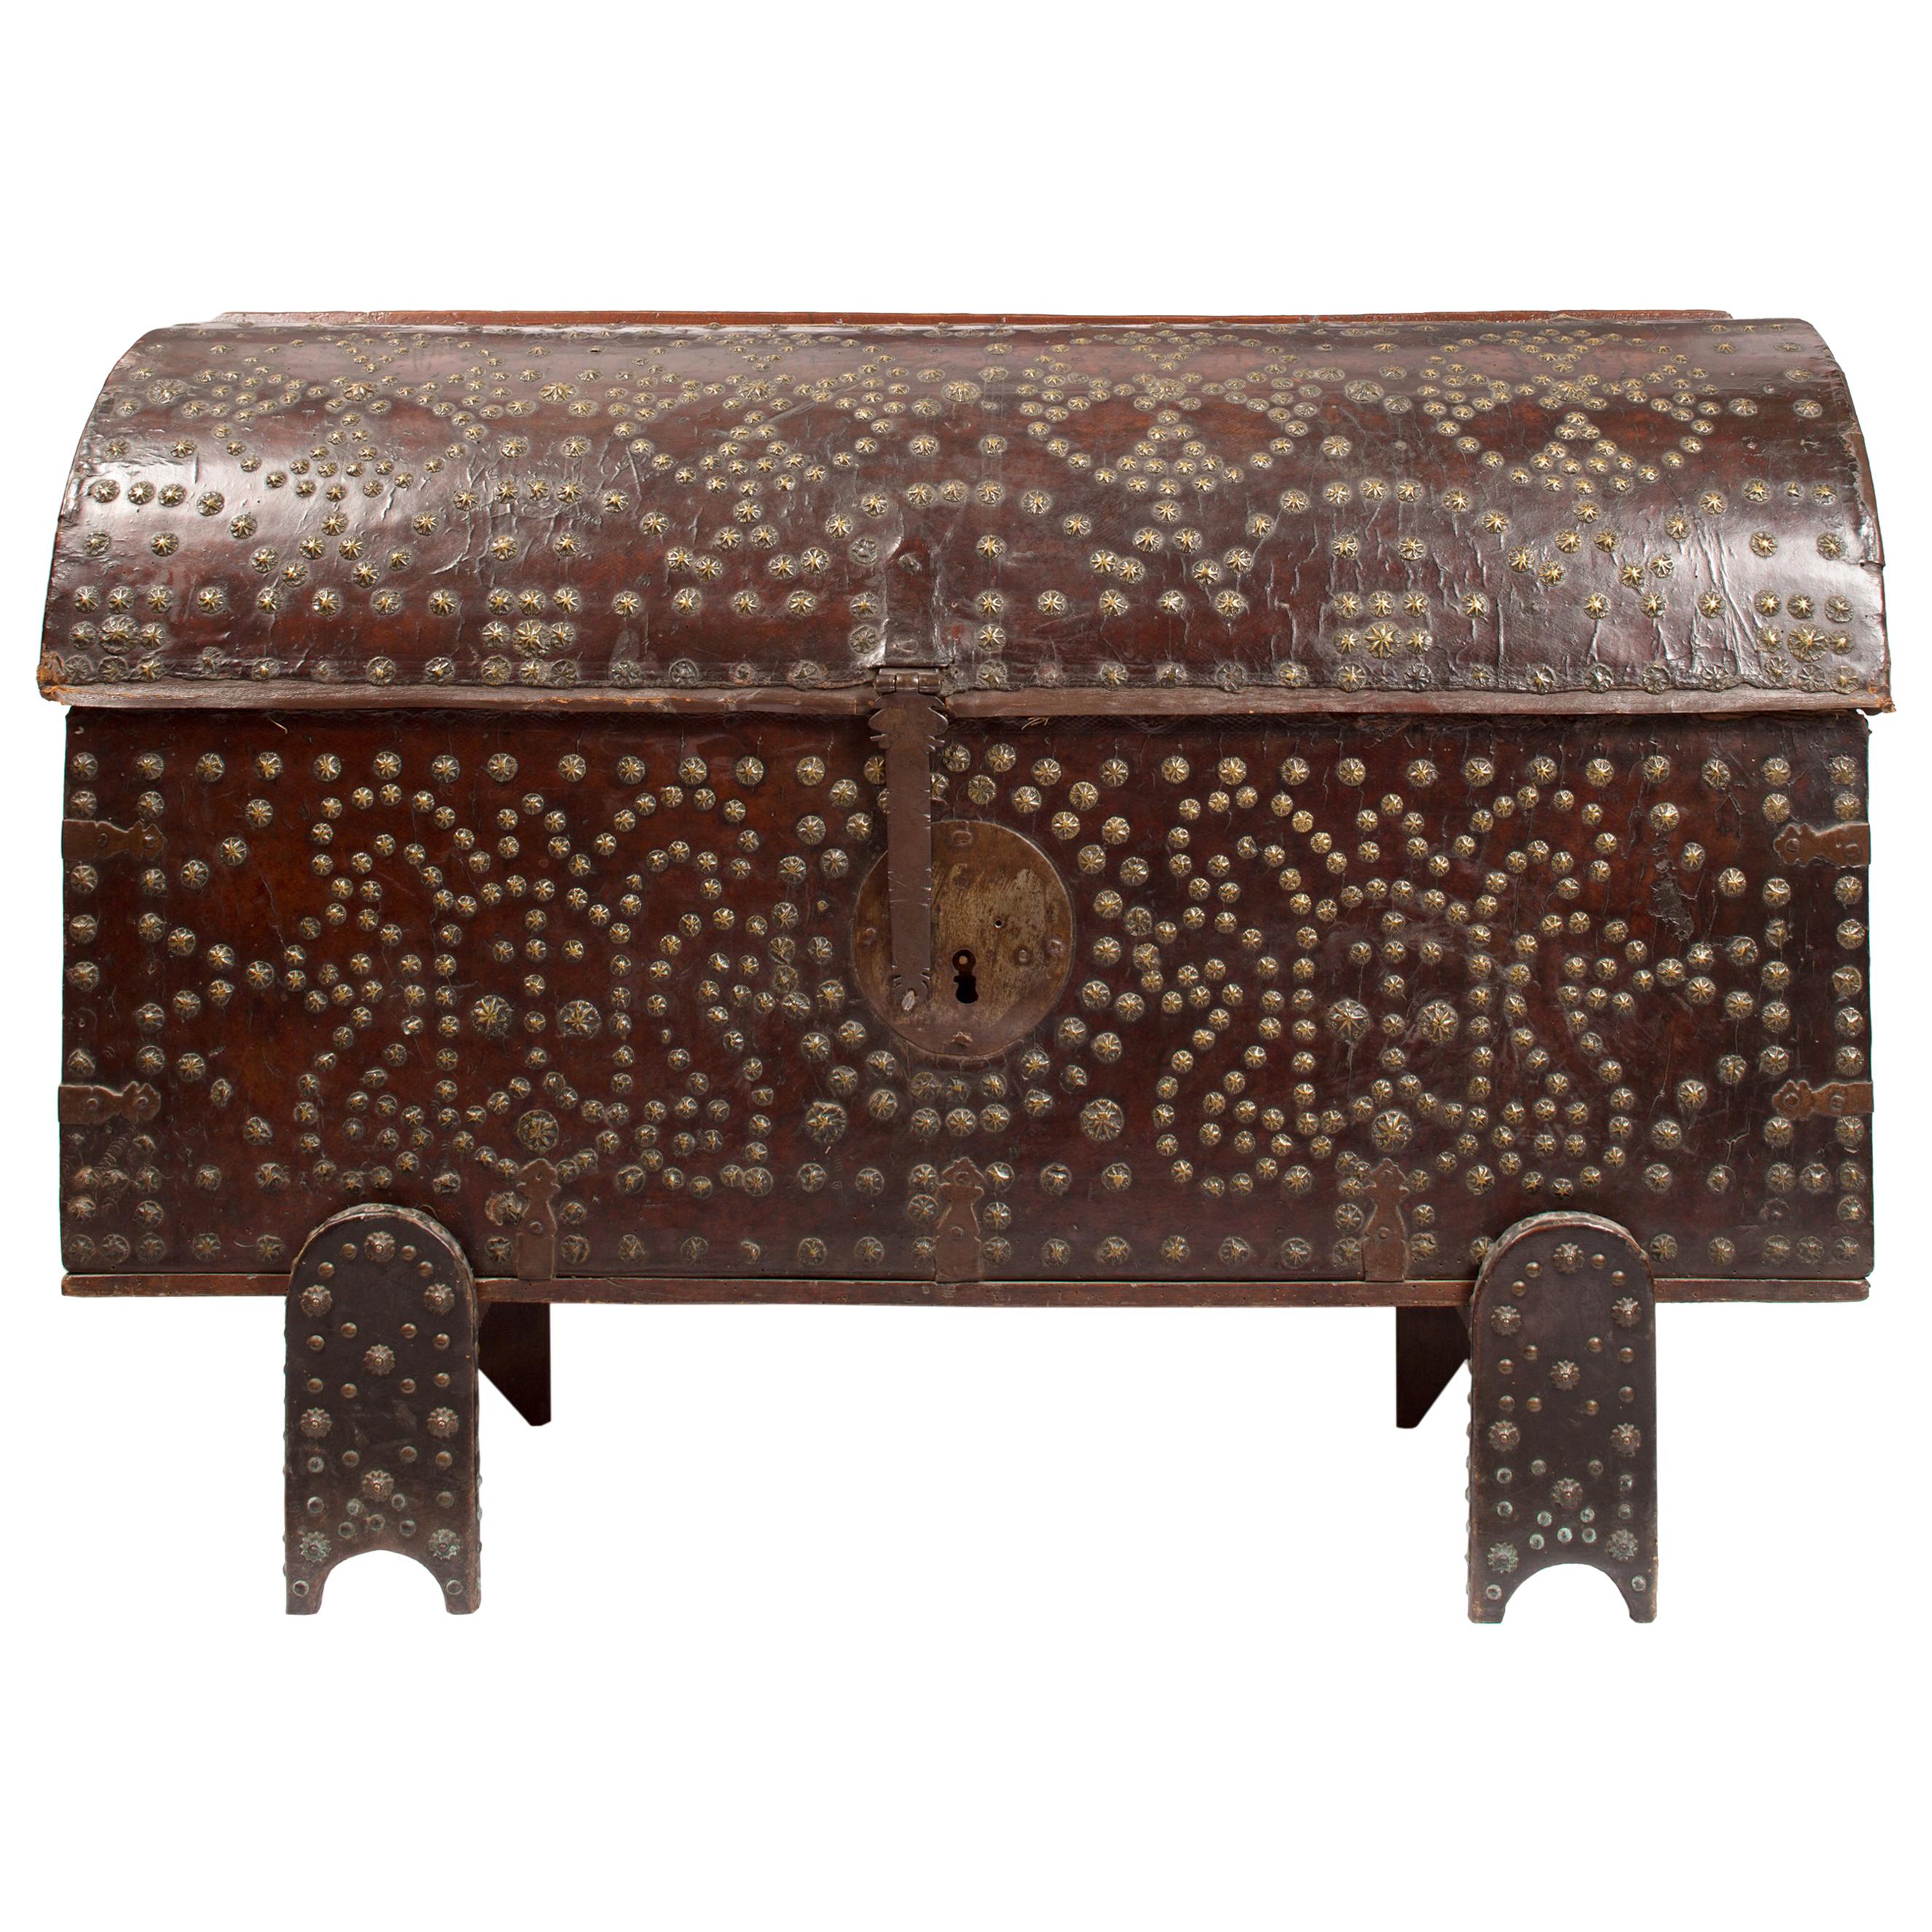 18th Century Spanish Leather Trunk with Studded Nailhead Detail